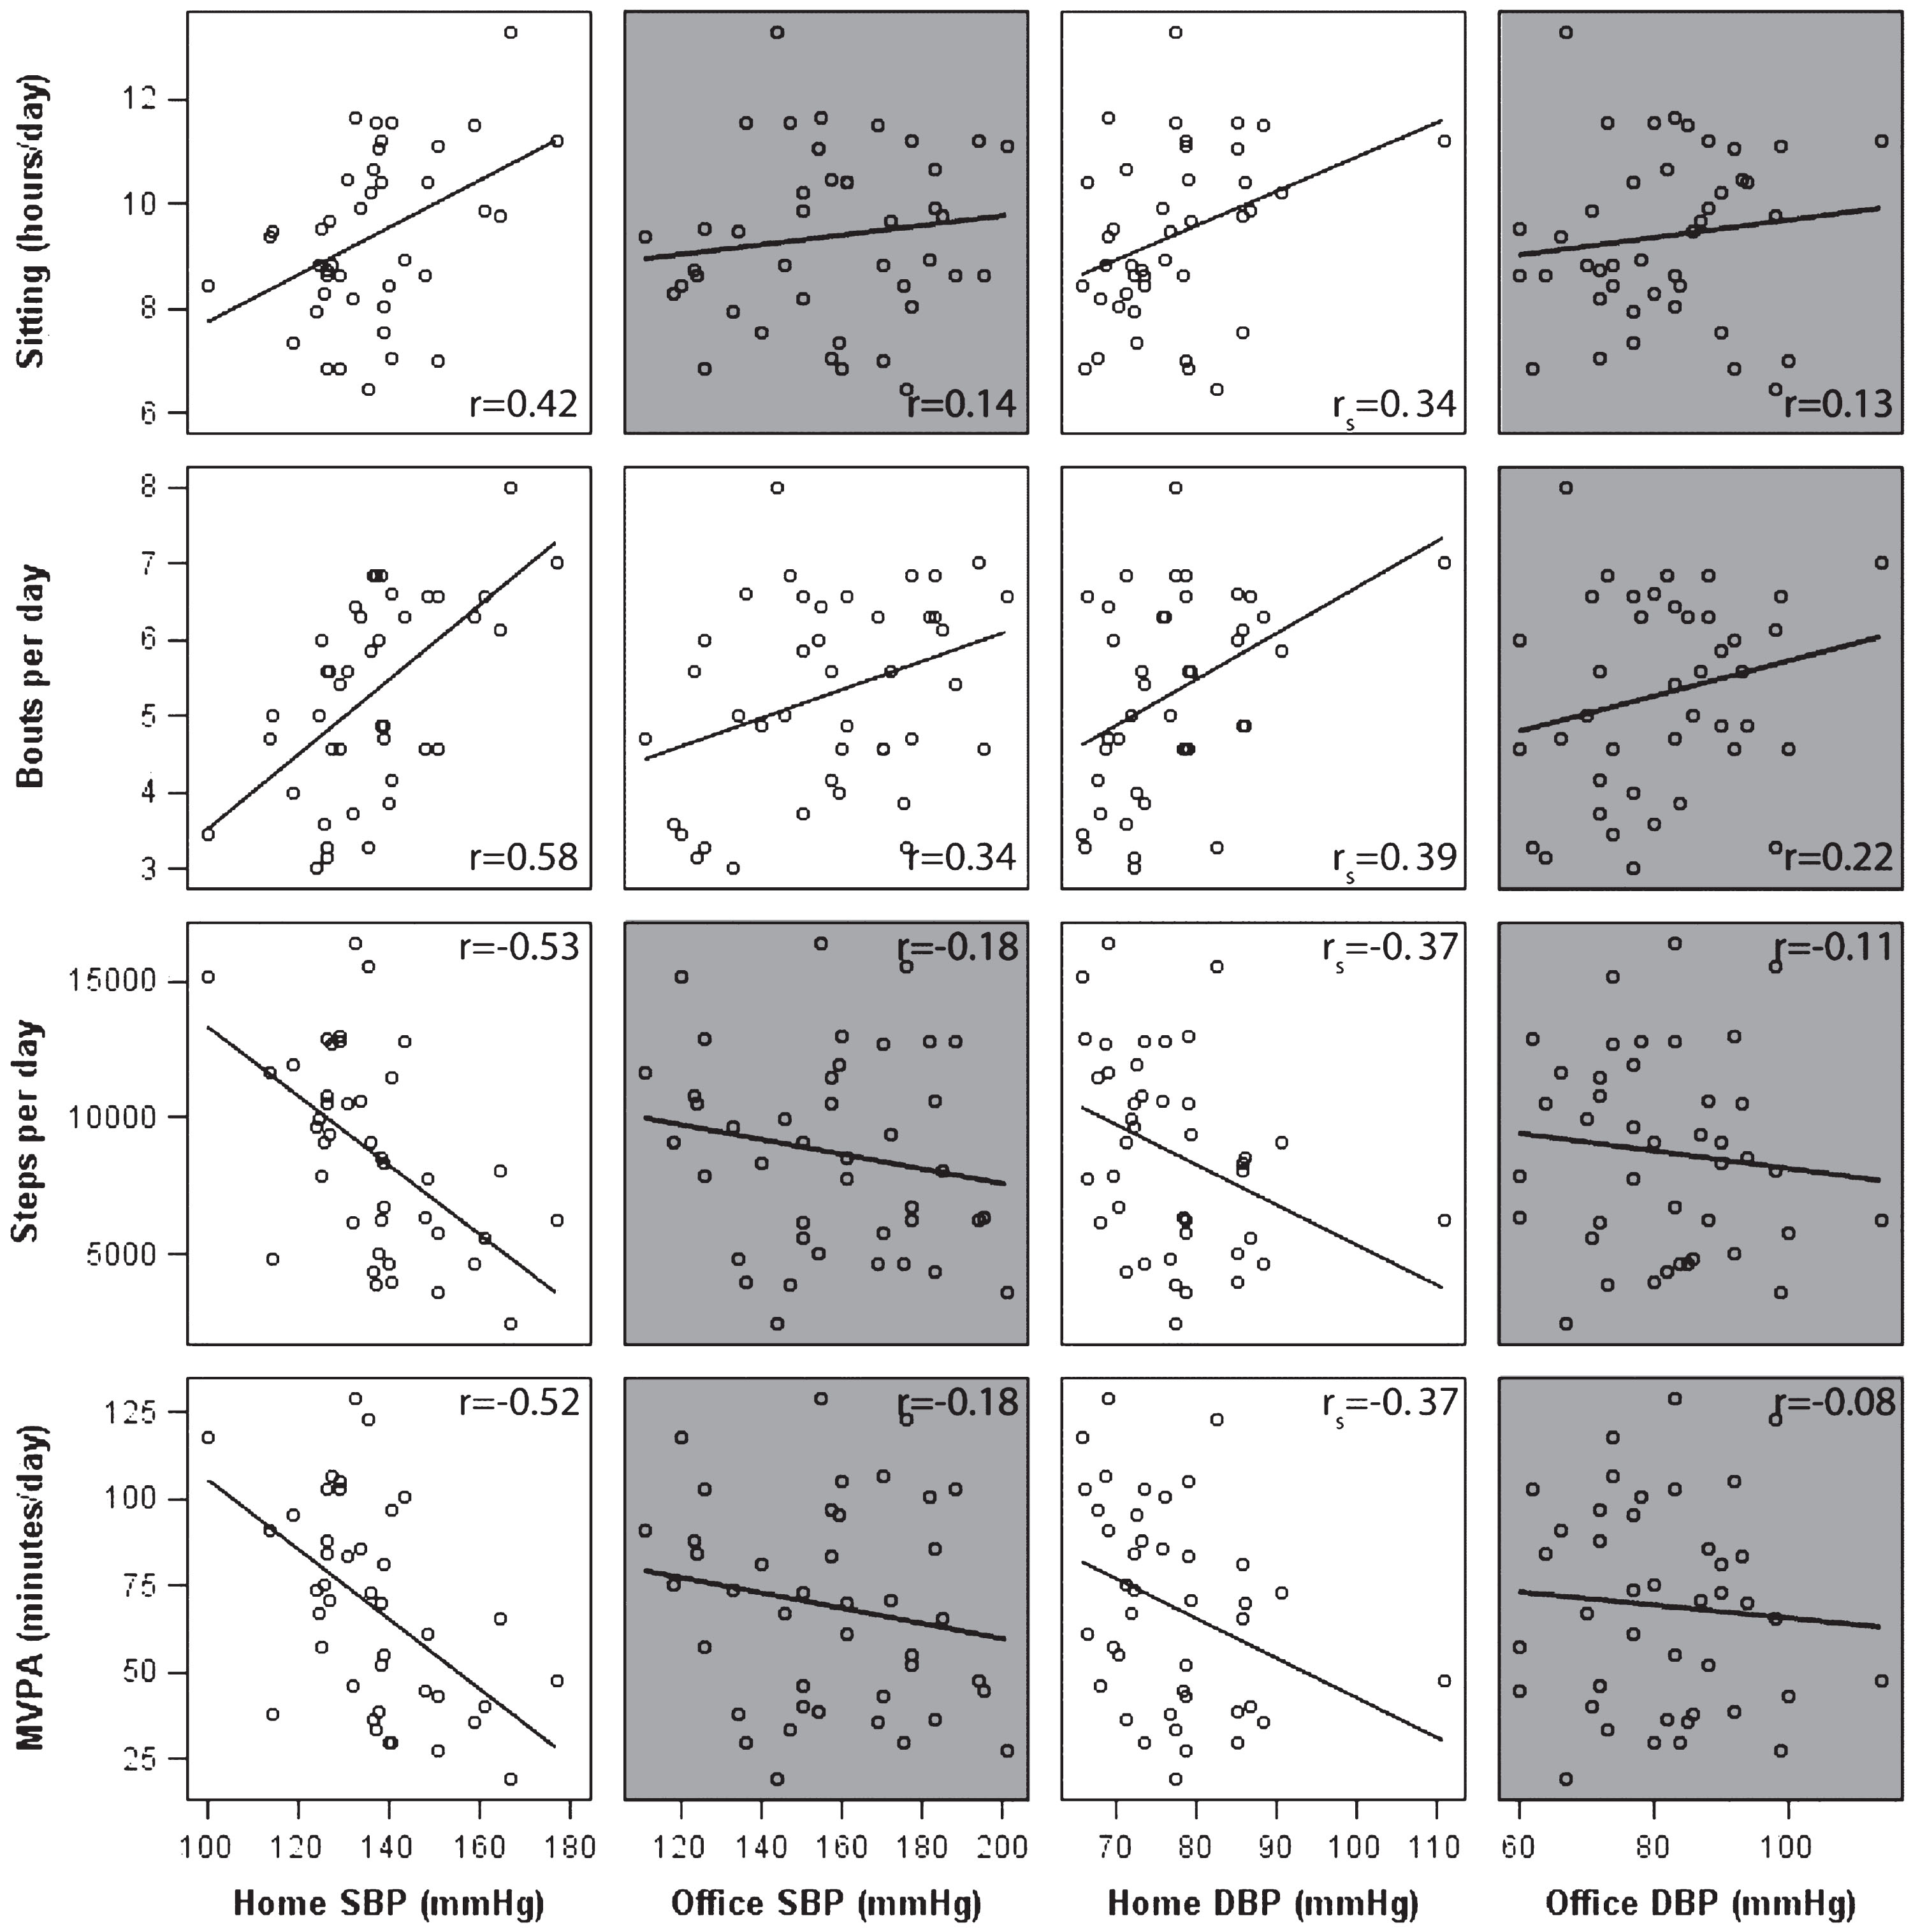 Scatter plots with uncorrected correlation coefficients between activity pattern measures and both home and office blood pressure measures in memory clinic patients. MVPA, moderate-to-vigorous physical activity; SBP, systolic blood pressure; DBP, diastolic blood pressure. Note: Correlations that were non-significant (p > 0.05) are shown in grey, Pearson (or Spearman’s for home DBP) correlations are shown in the right corners per association.